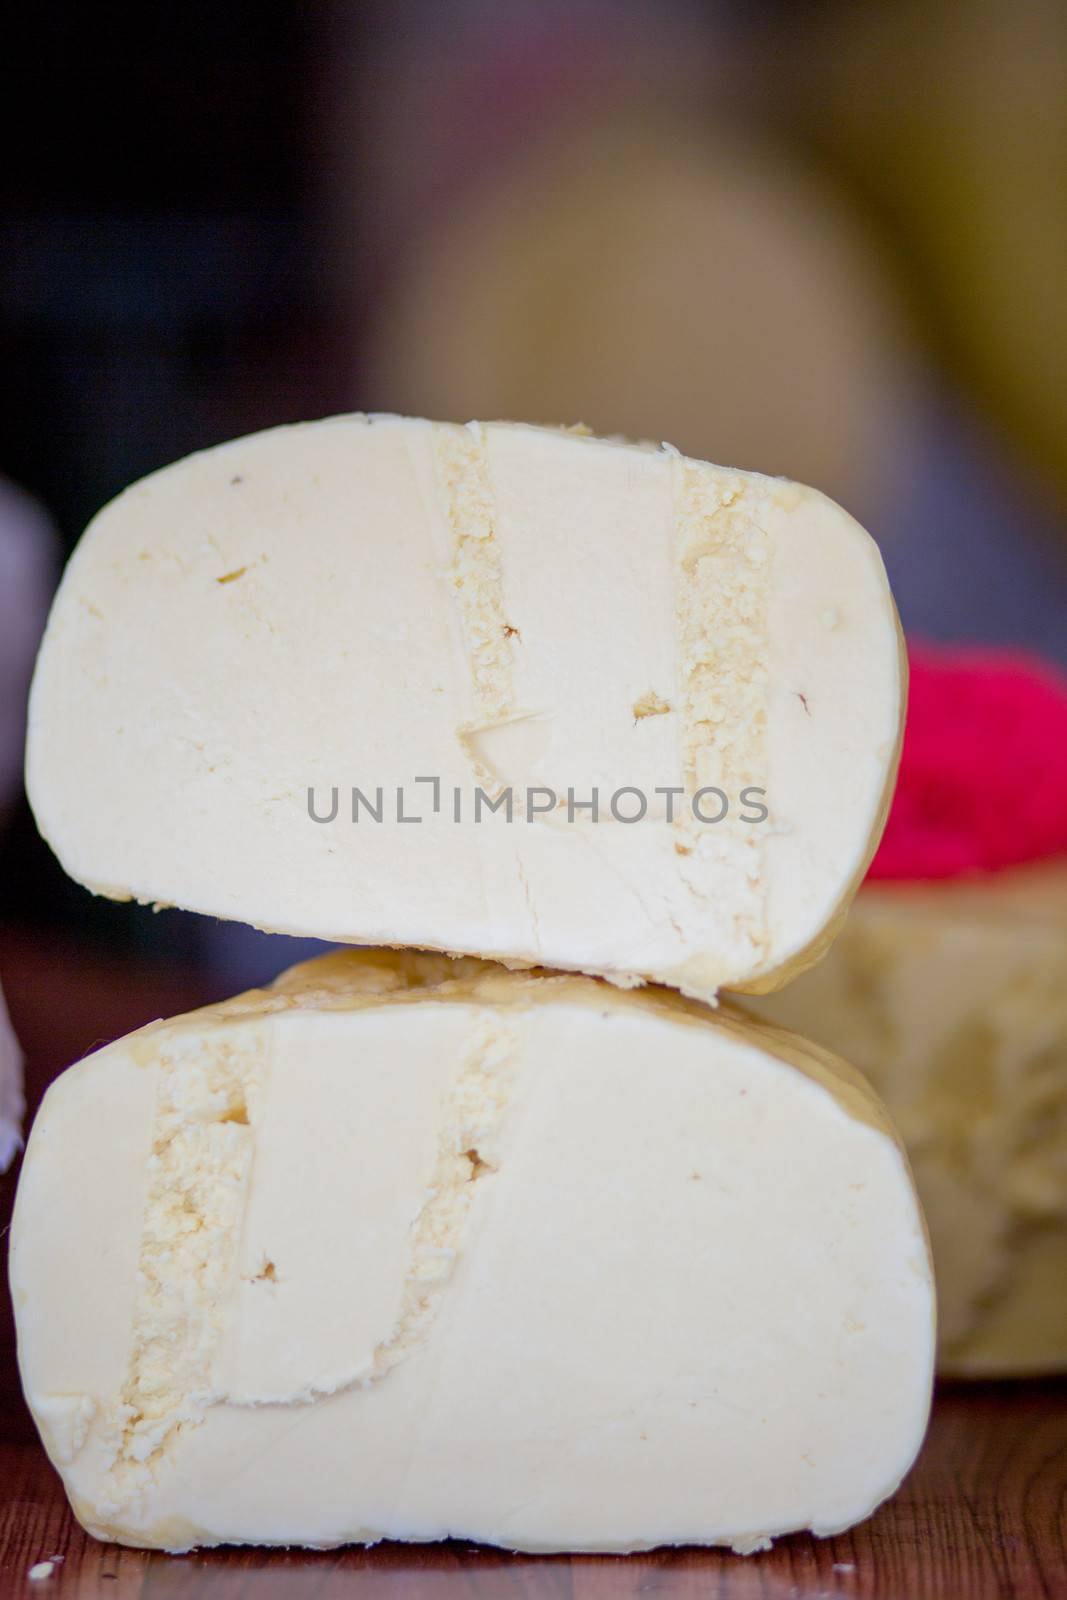 Yak milk based cheese in Lhasa by watchtheworld